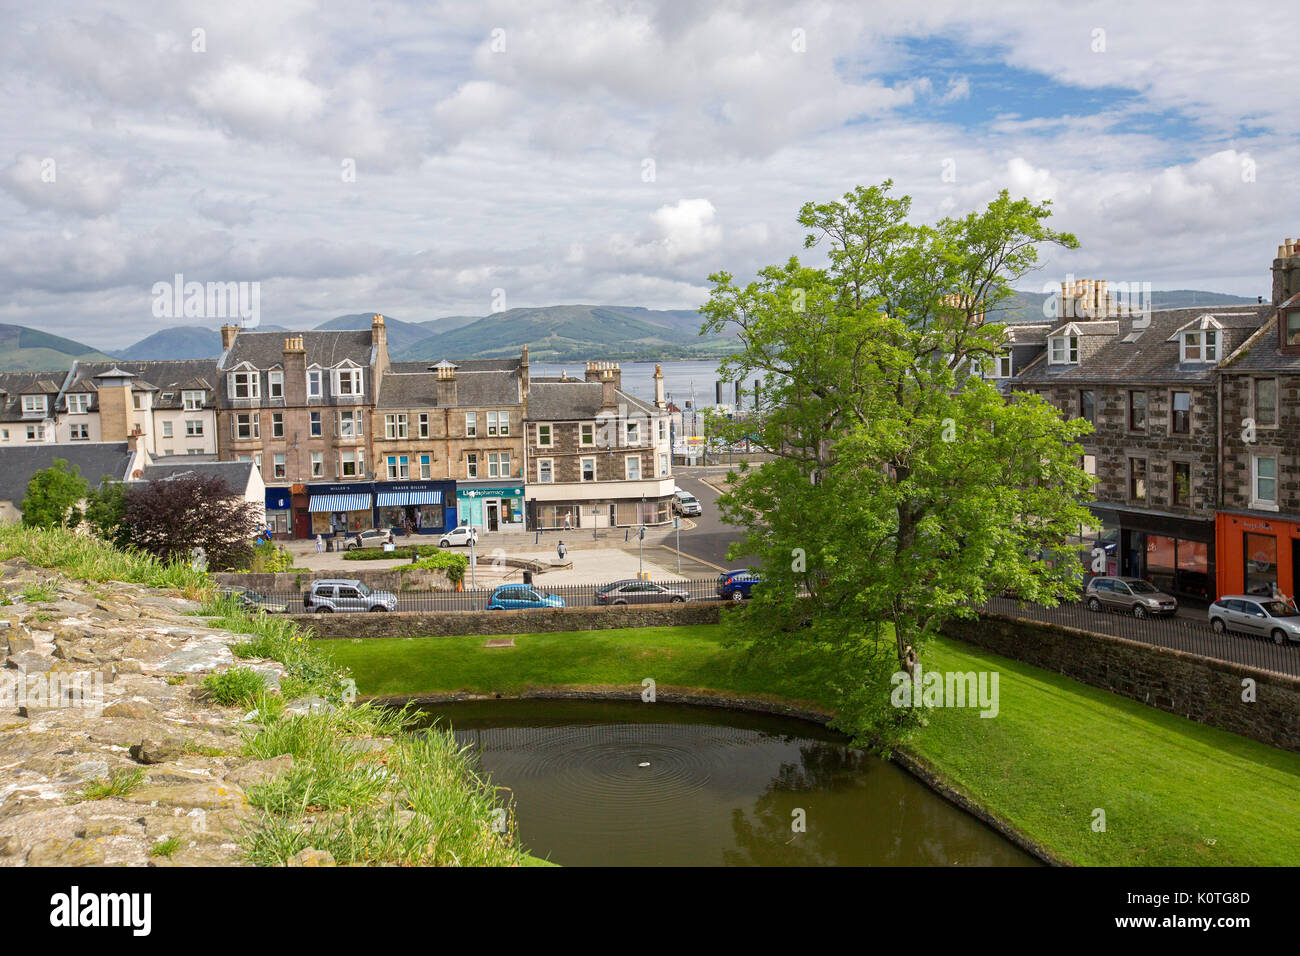 View from historic castle of town of Rothesay on island of Bute, with castle wall & moat in foreground & mountains of Scottish mainland in distance Stock Photo